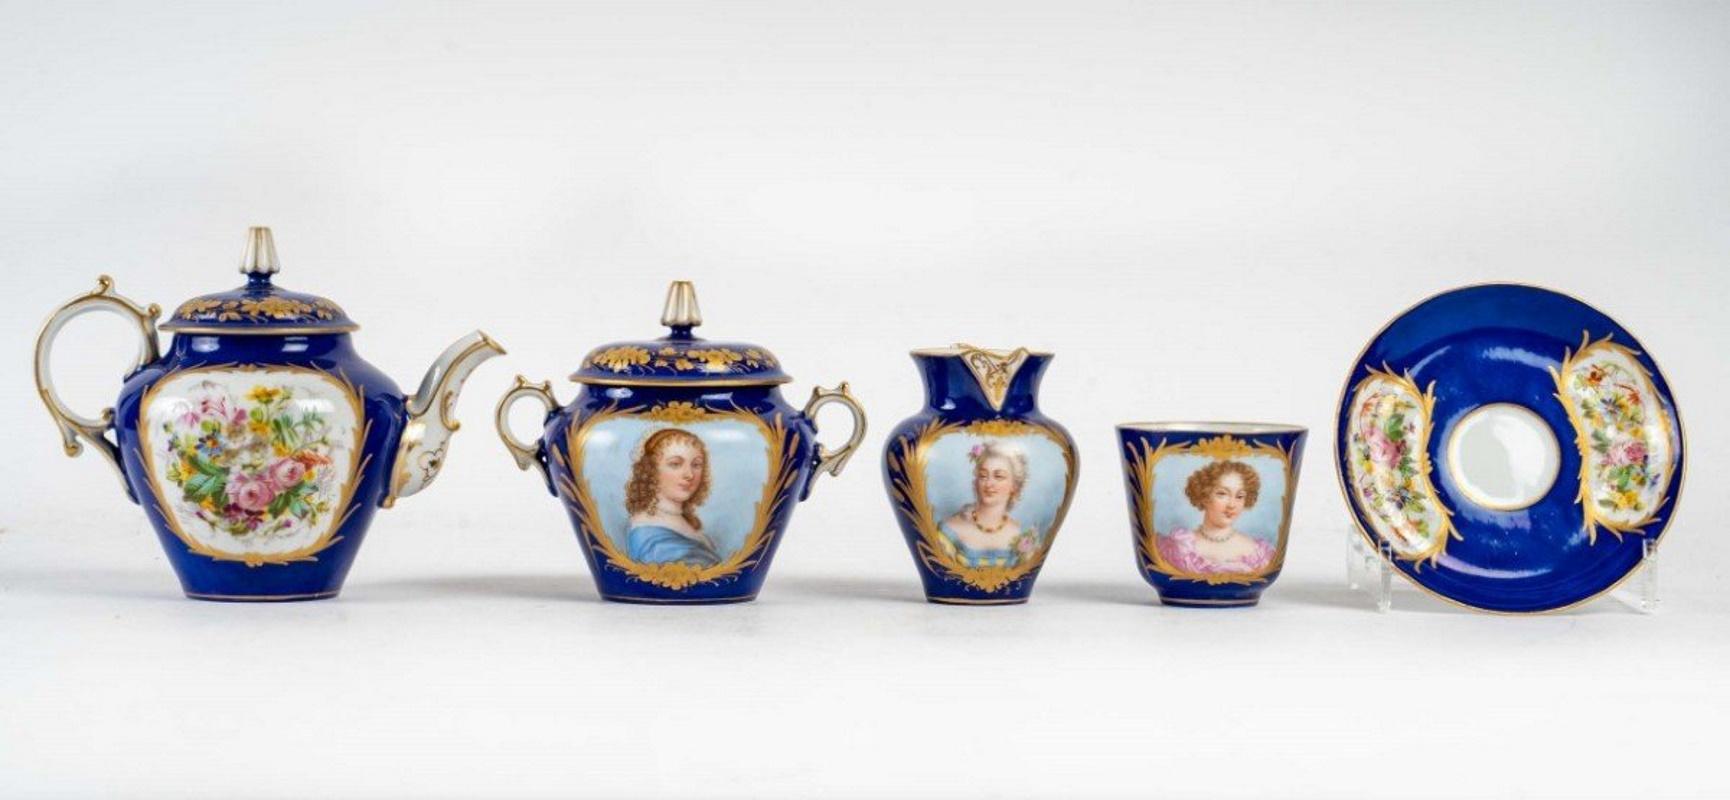 French Tea and Coffee Service in Blue Porcelain Signed Sèvres XIXth Century